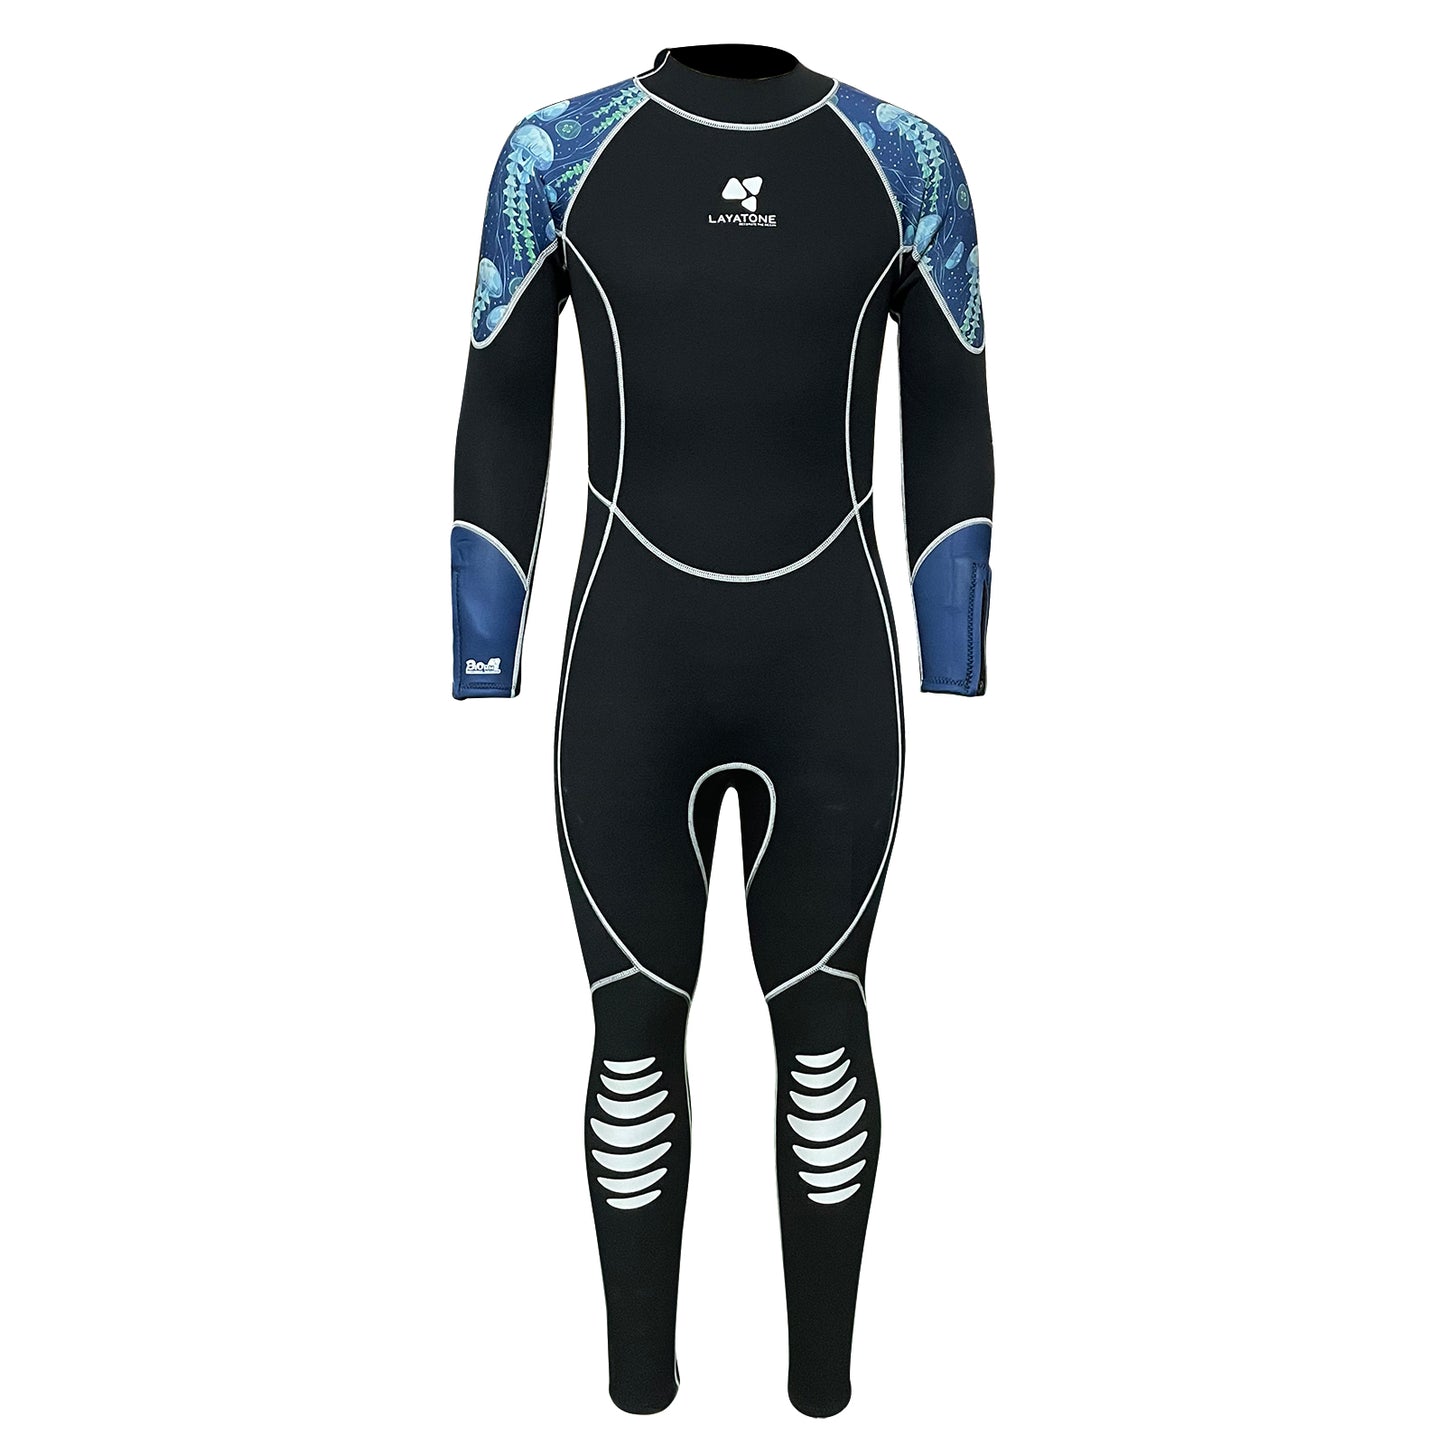 LayaTone Wetsuit Women Full Body 3mm Neoprene Diving Suit with Back Zip, Wetsuits for Women in Cold Water Swimming Diving Snorkeling Kayaking